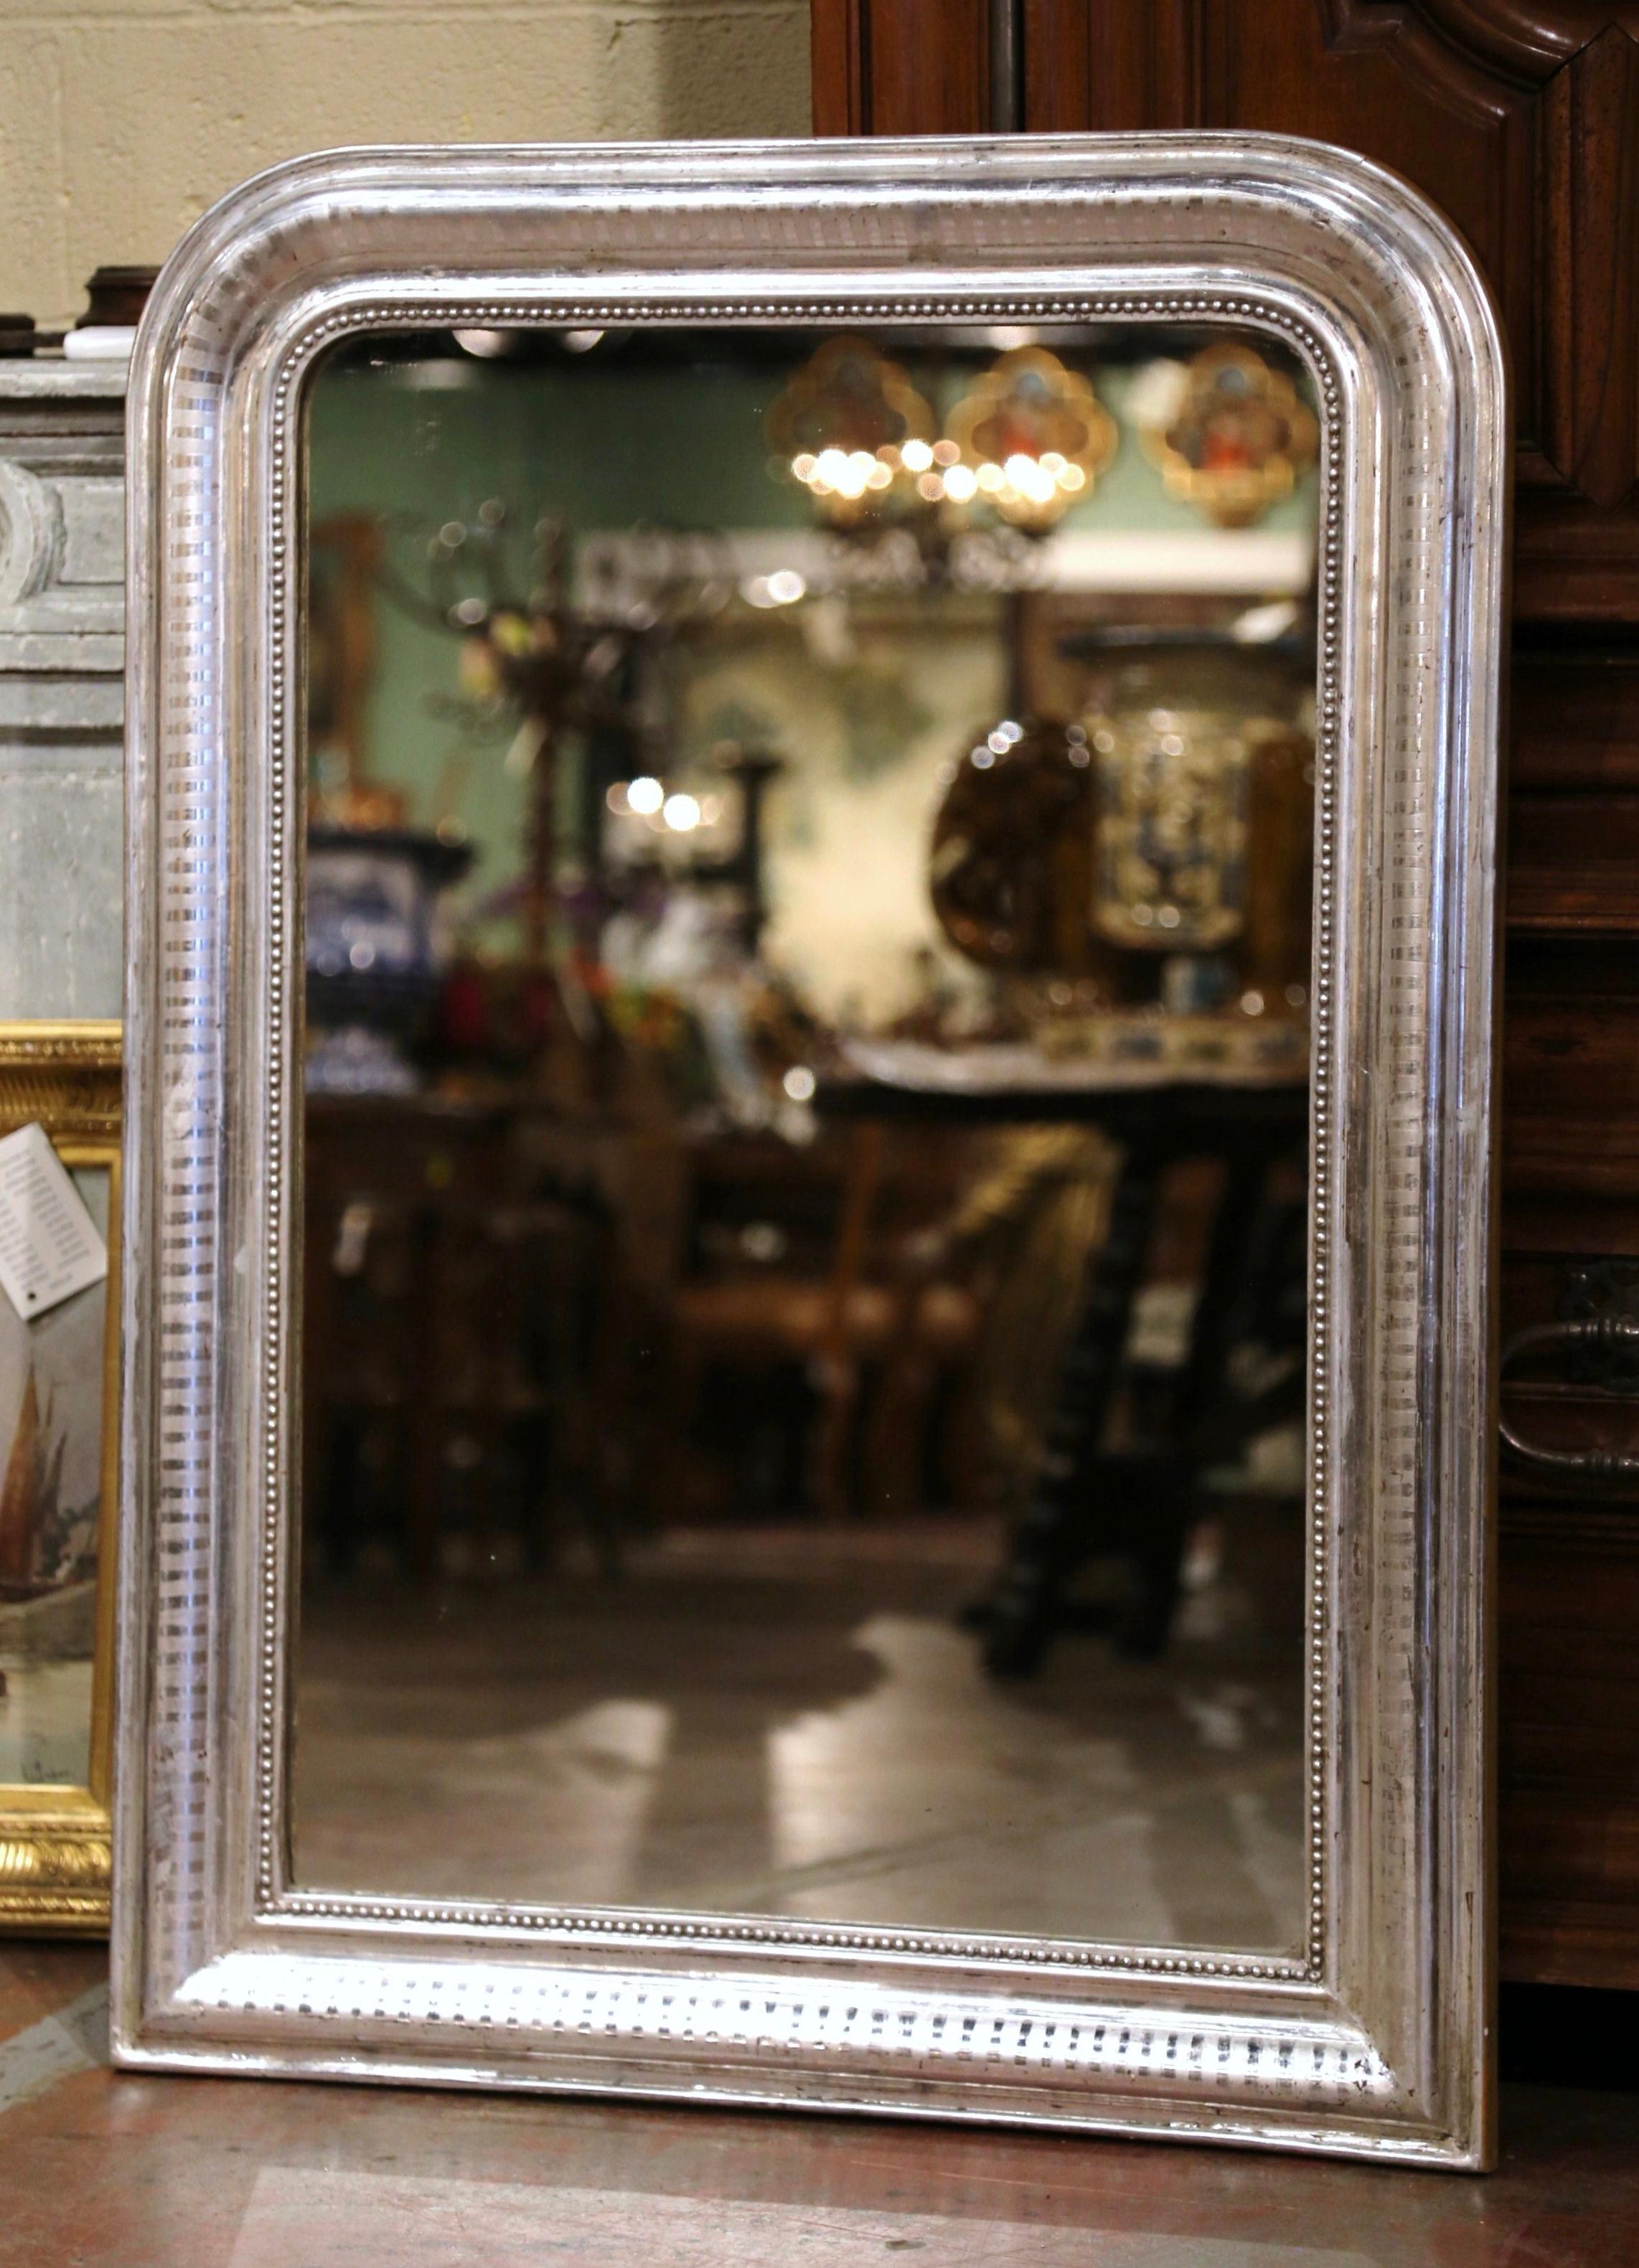 Crafted in the Burgundy region of France, circa 1880, the antique mirror has traditional, timeless lines with rounded corners. The rectangular frame is decorated with a luxurious silver leaf finish over discrete engraved two-tone stripe motif, and